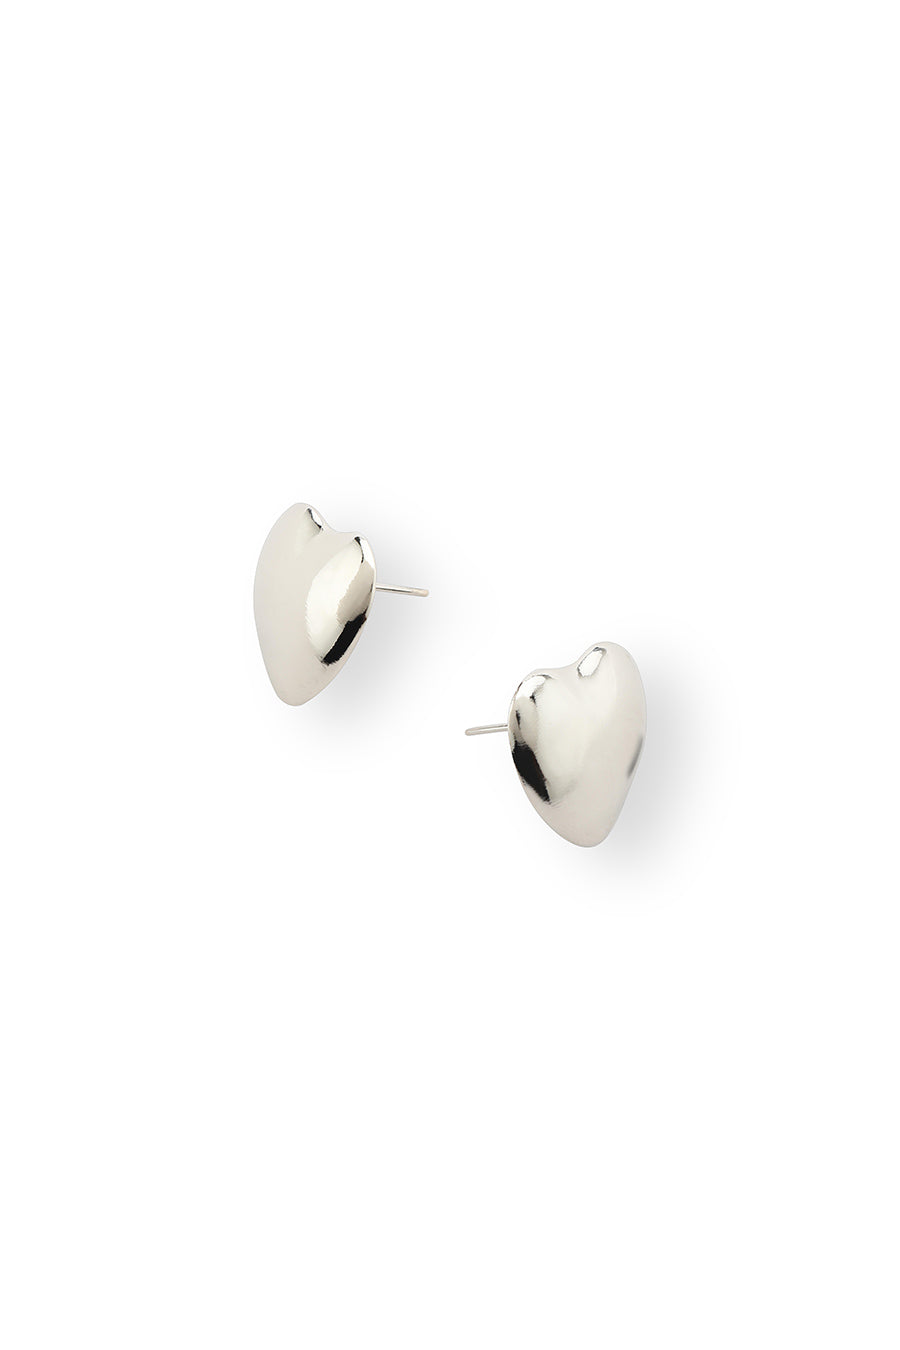 Silver Polished Love Candy Stud Earrings